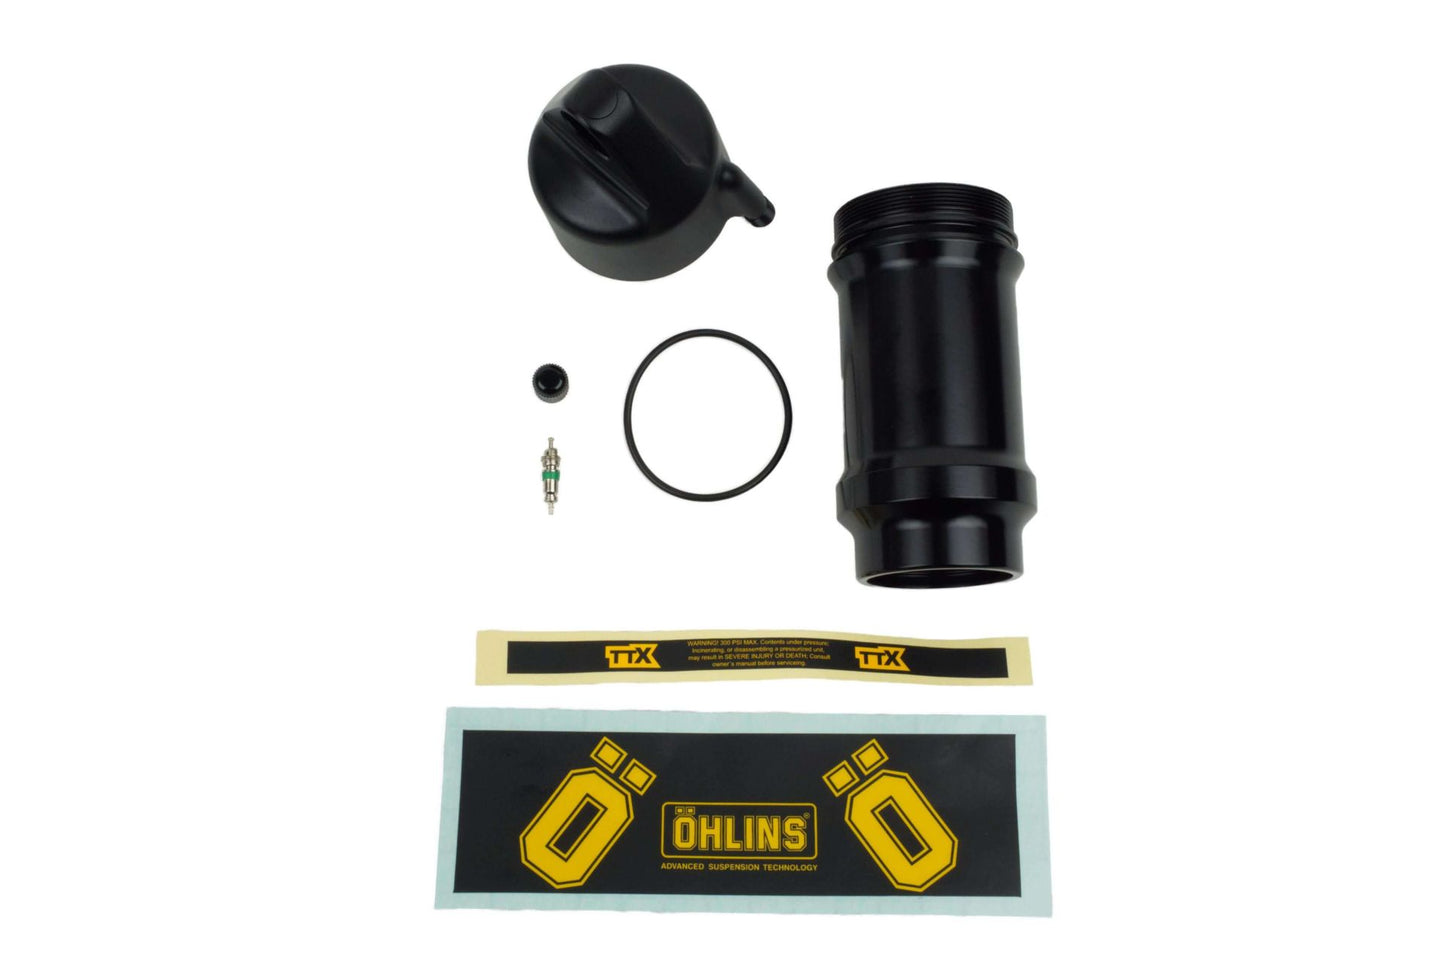 Öhlins TTX1 Air spring kit complete with end eye